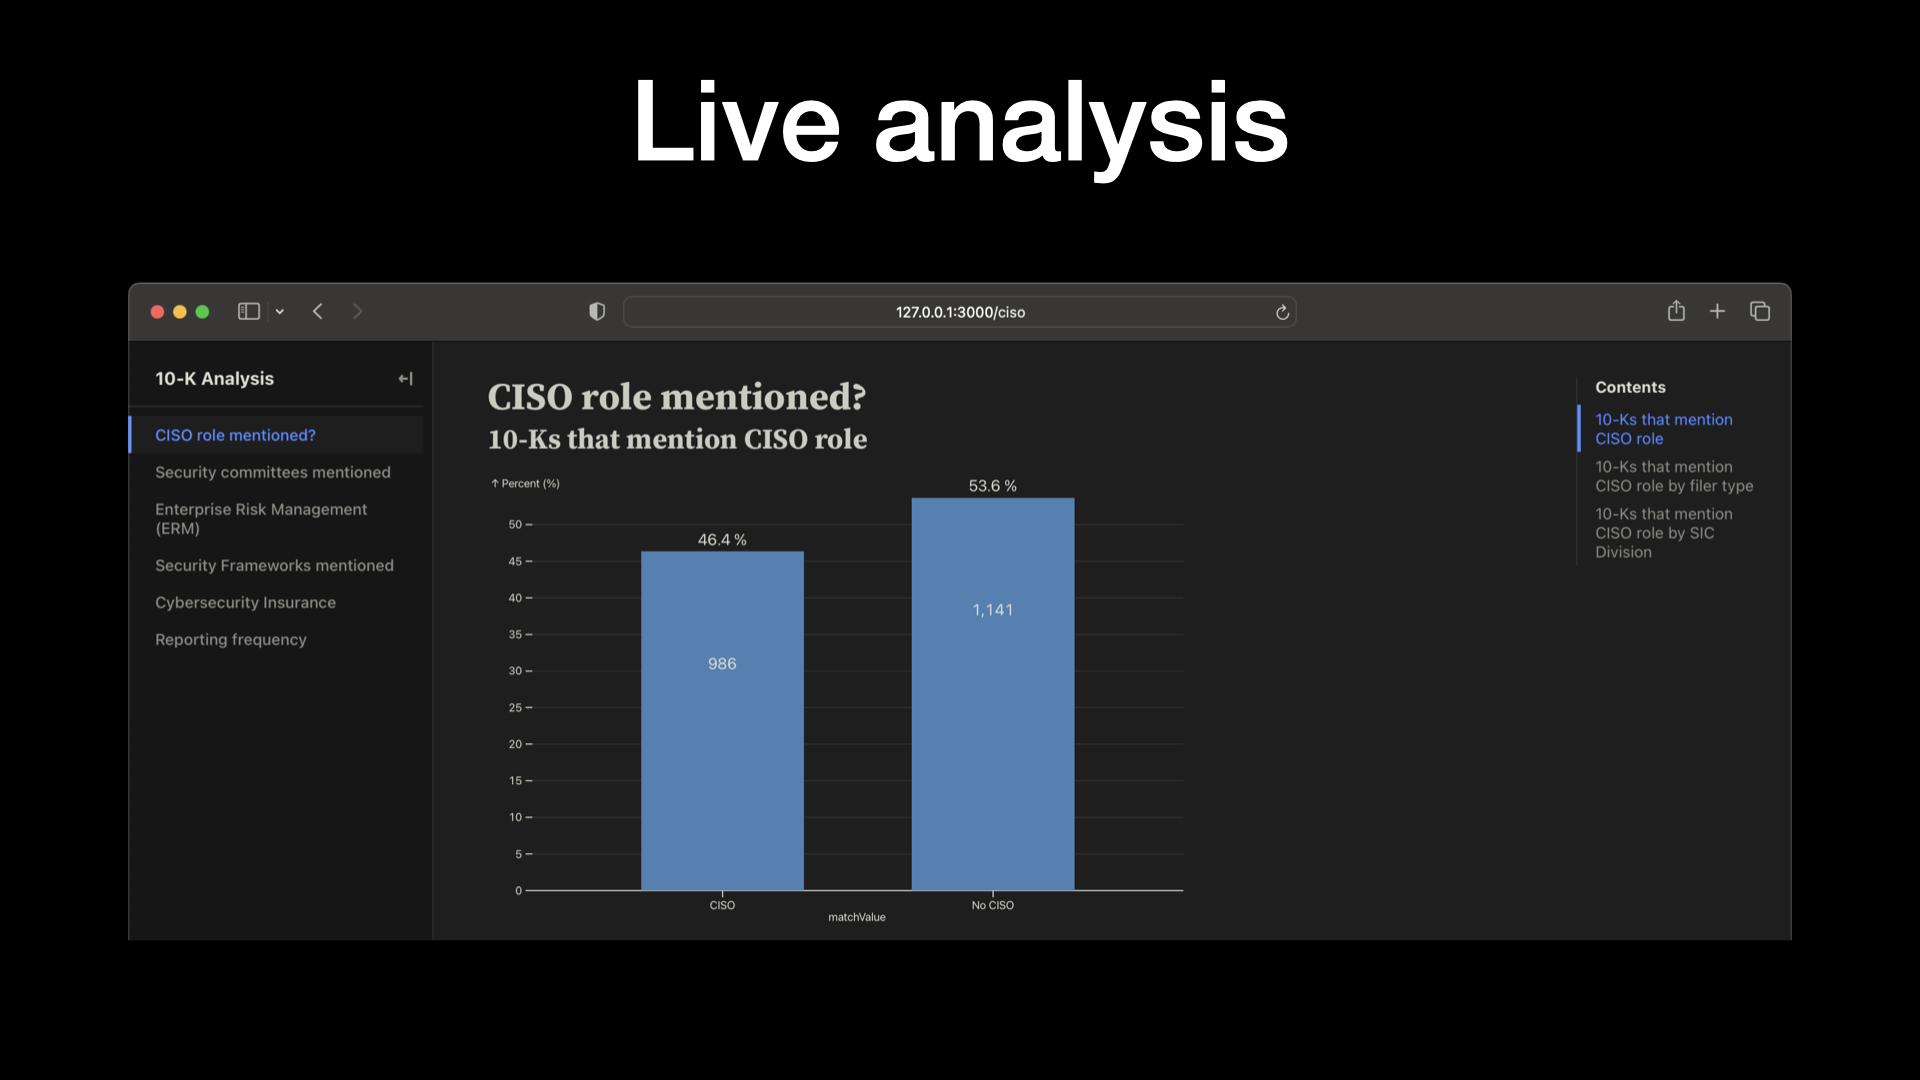 Analysis with graphs showing percent of 10-Ks that mention the CISO/CSO role